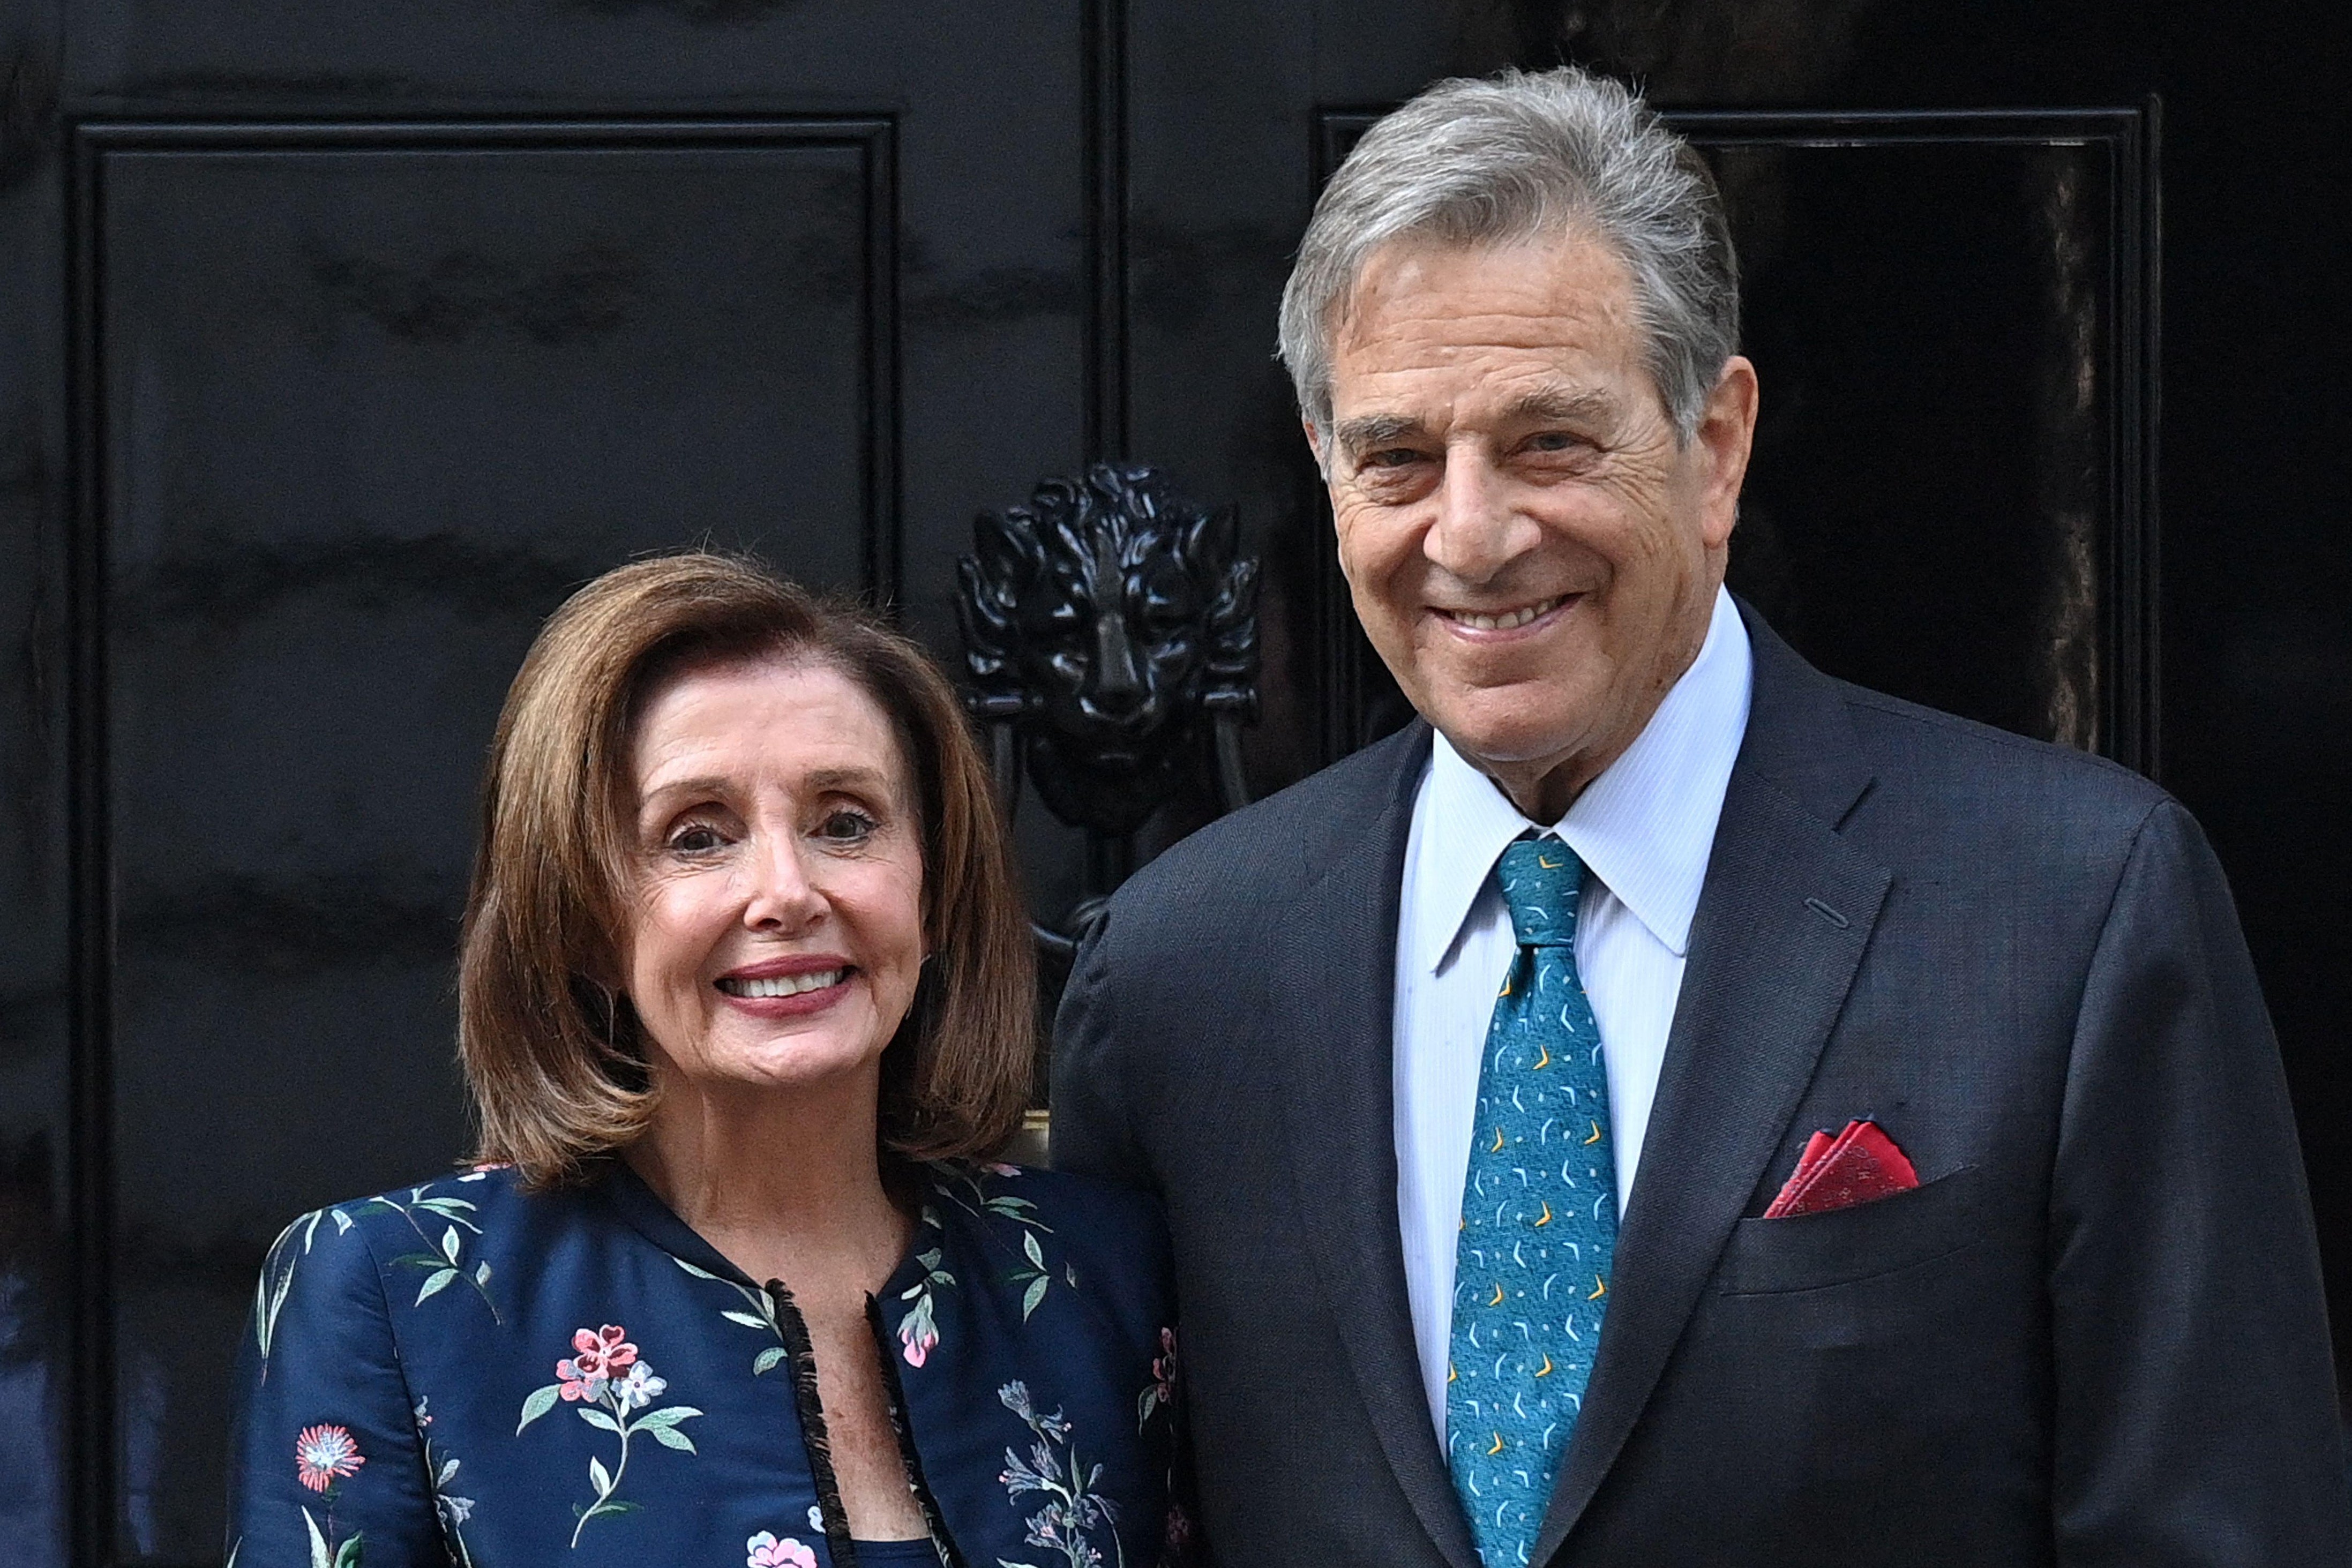 A photo of the US Speaker of the House, Nancy Pelosi, and her husband Paul Pelosi, in front of 10 Downing Street in the U.K.